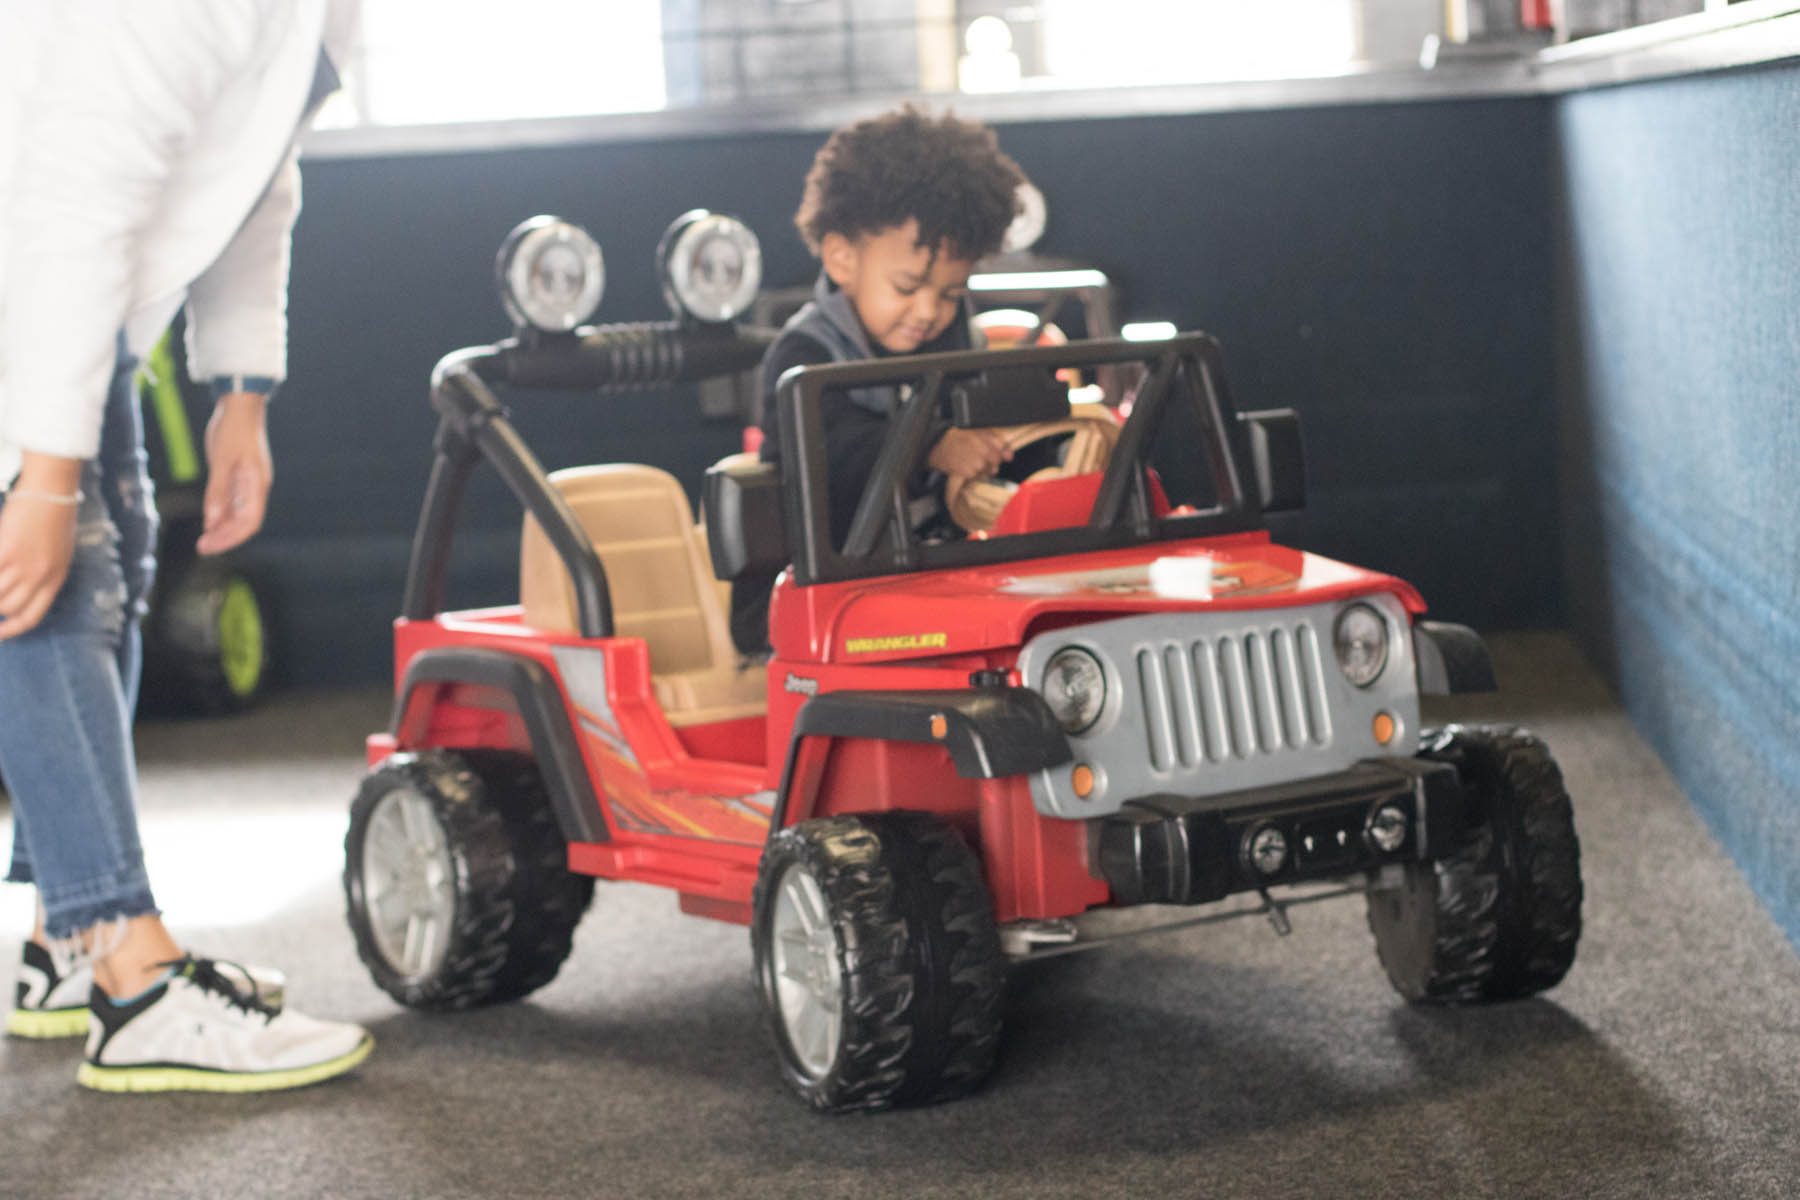 Young boy in toy jeep.